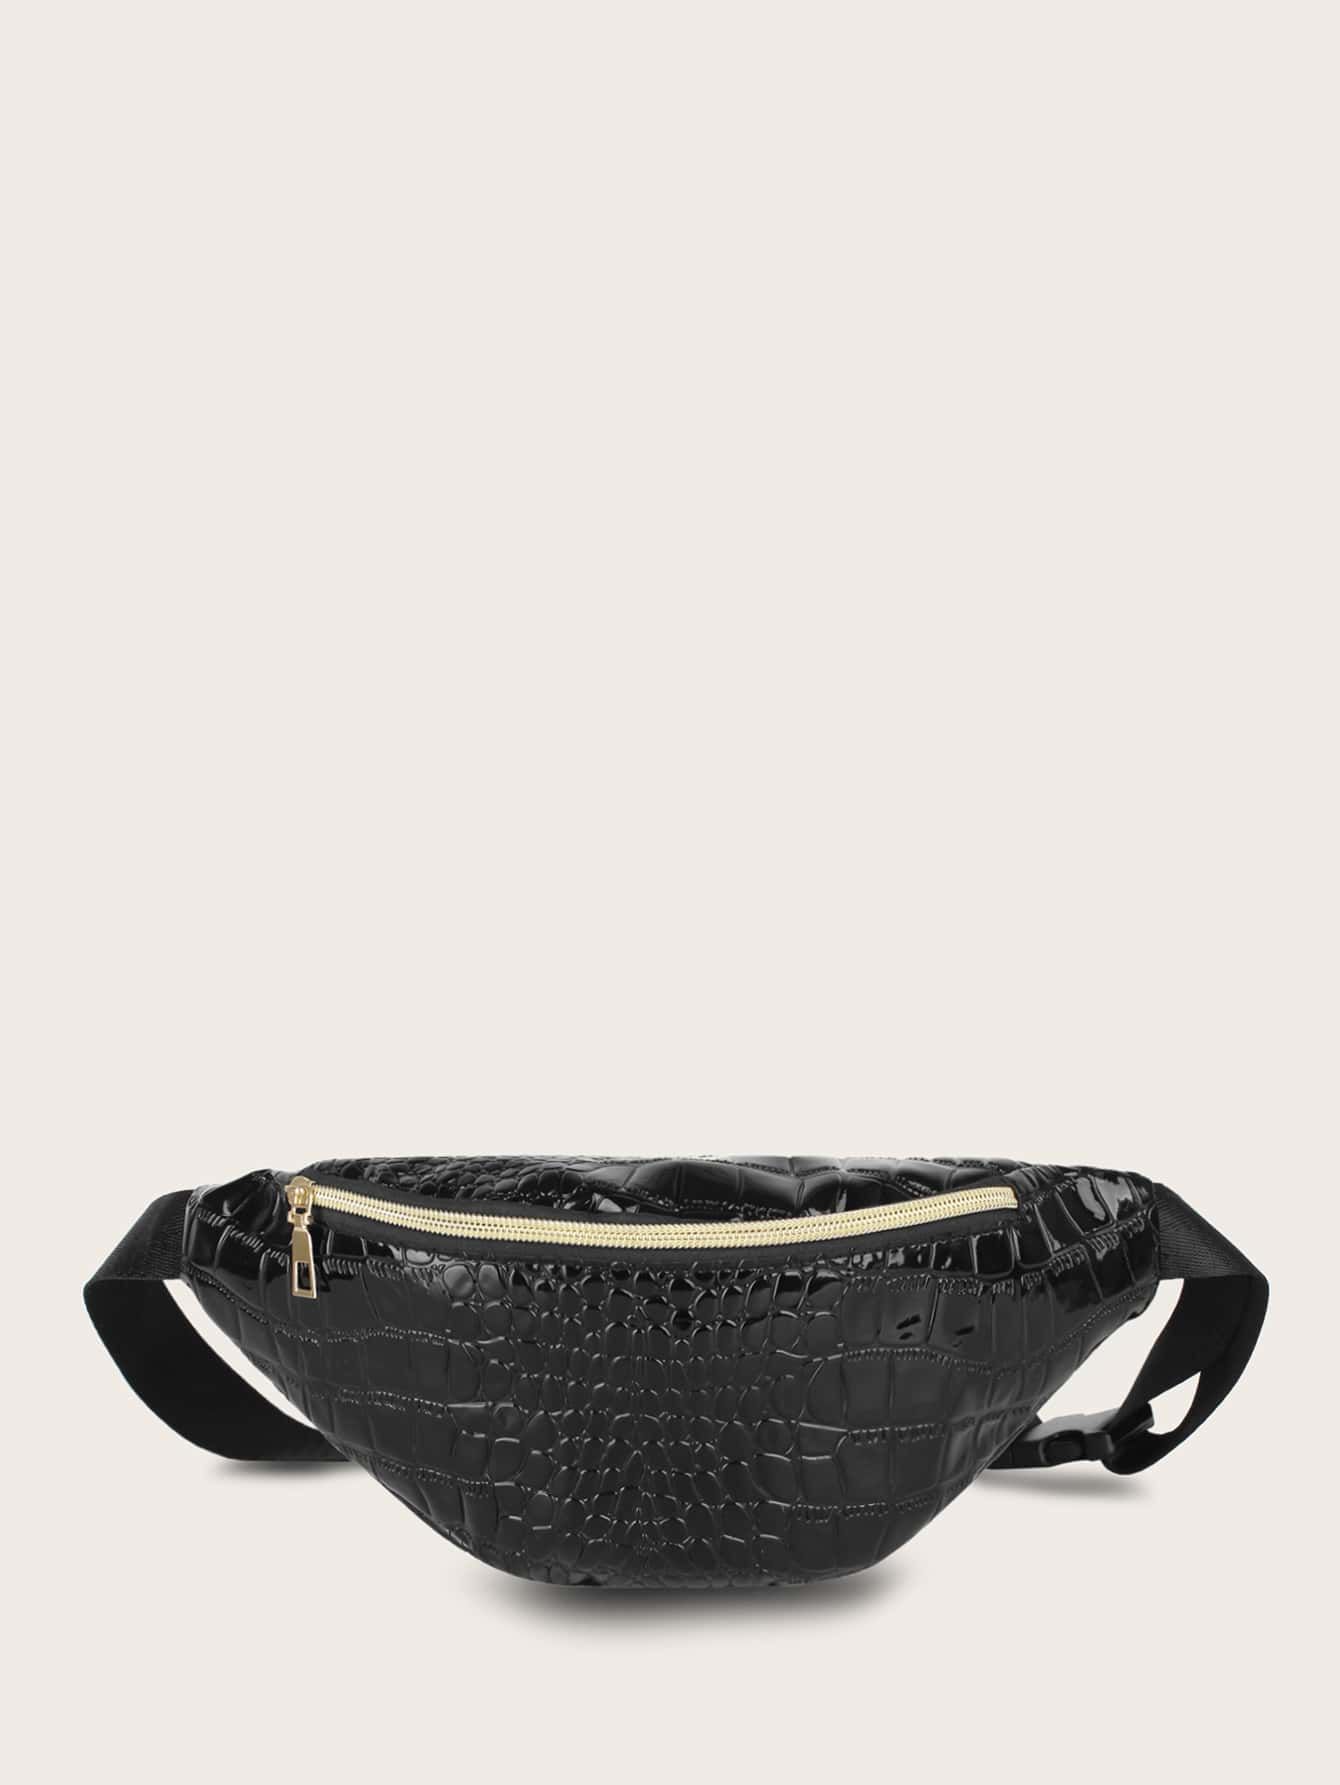 Croc Embossed Zip Front Fanny Pack | SHEIN